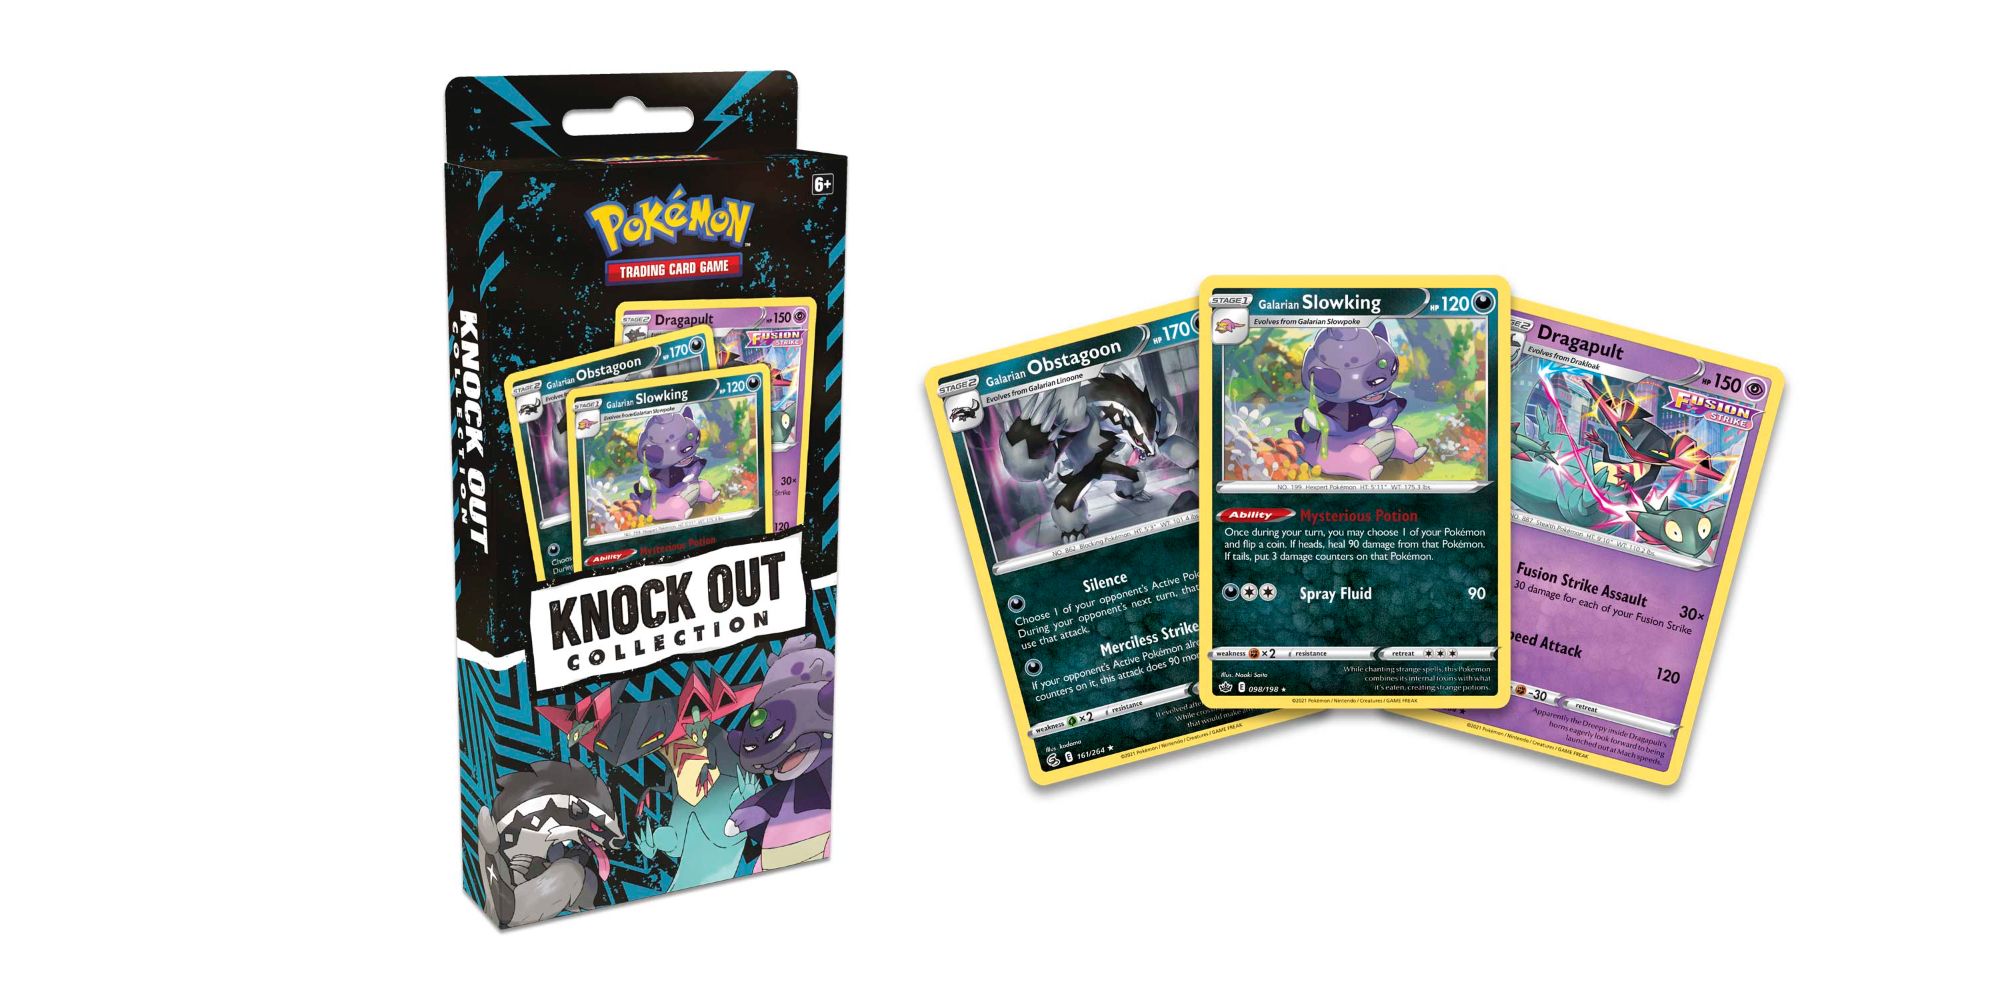 Pokémon TCG's newest Knock Out Collection box next to the three Galaxy Foil reprints that come inside.